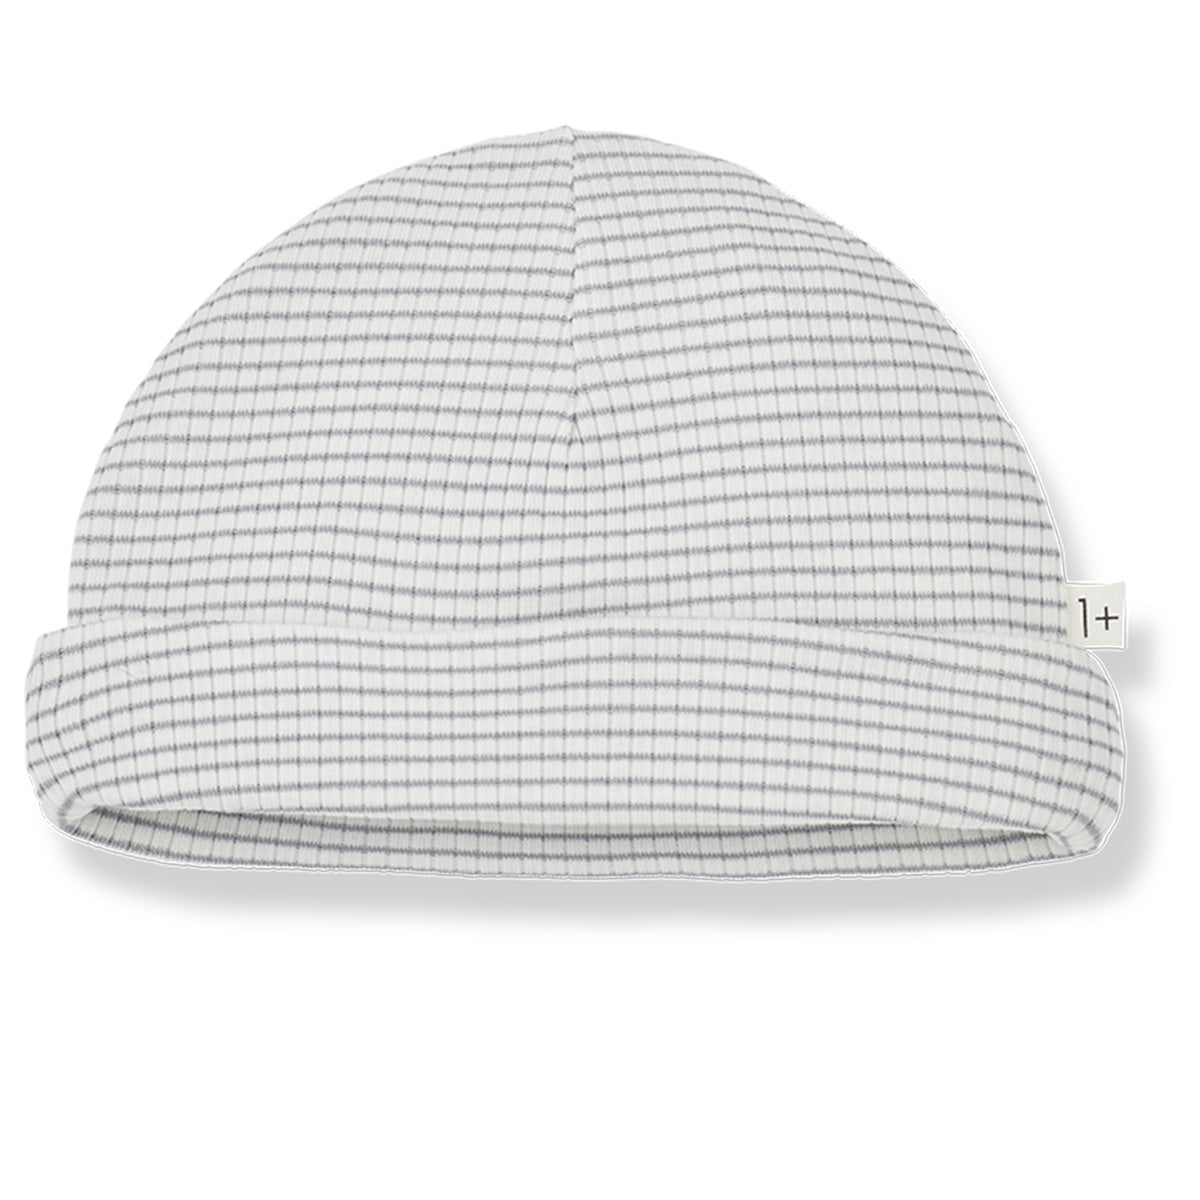 The Gio Beanie from 1 + in the Family. The hat has a striped all-over print